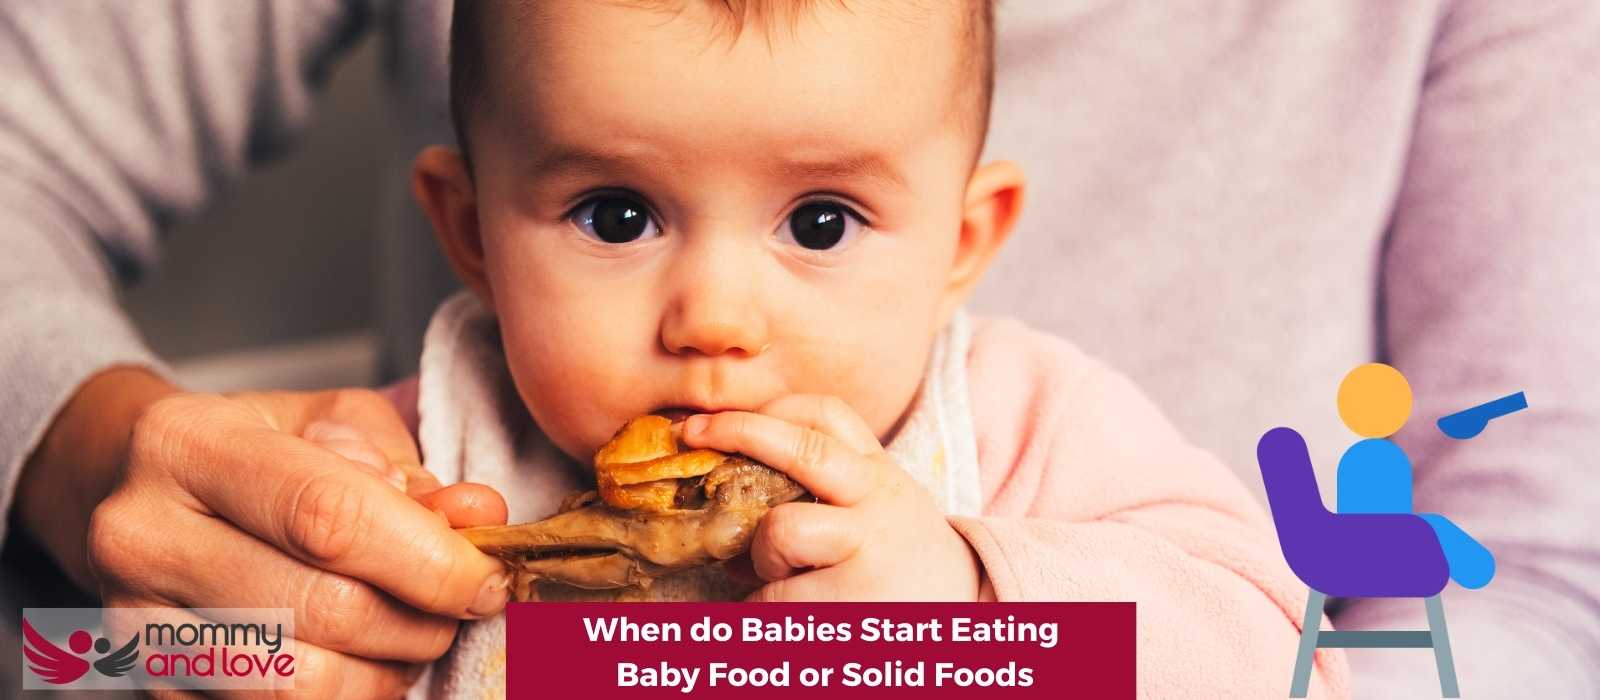 When do Babies Start Eating Baby Food or Solid Foods